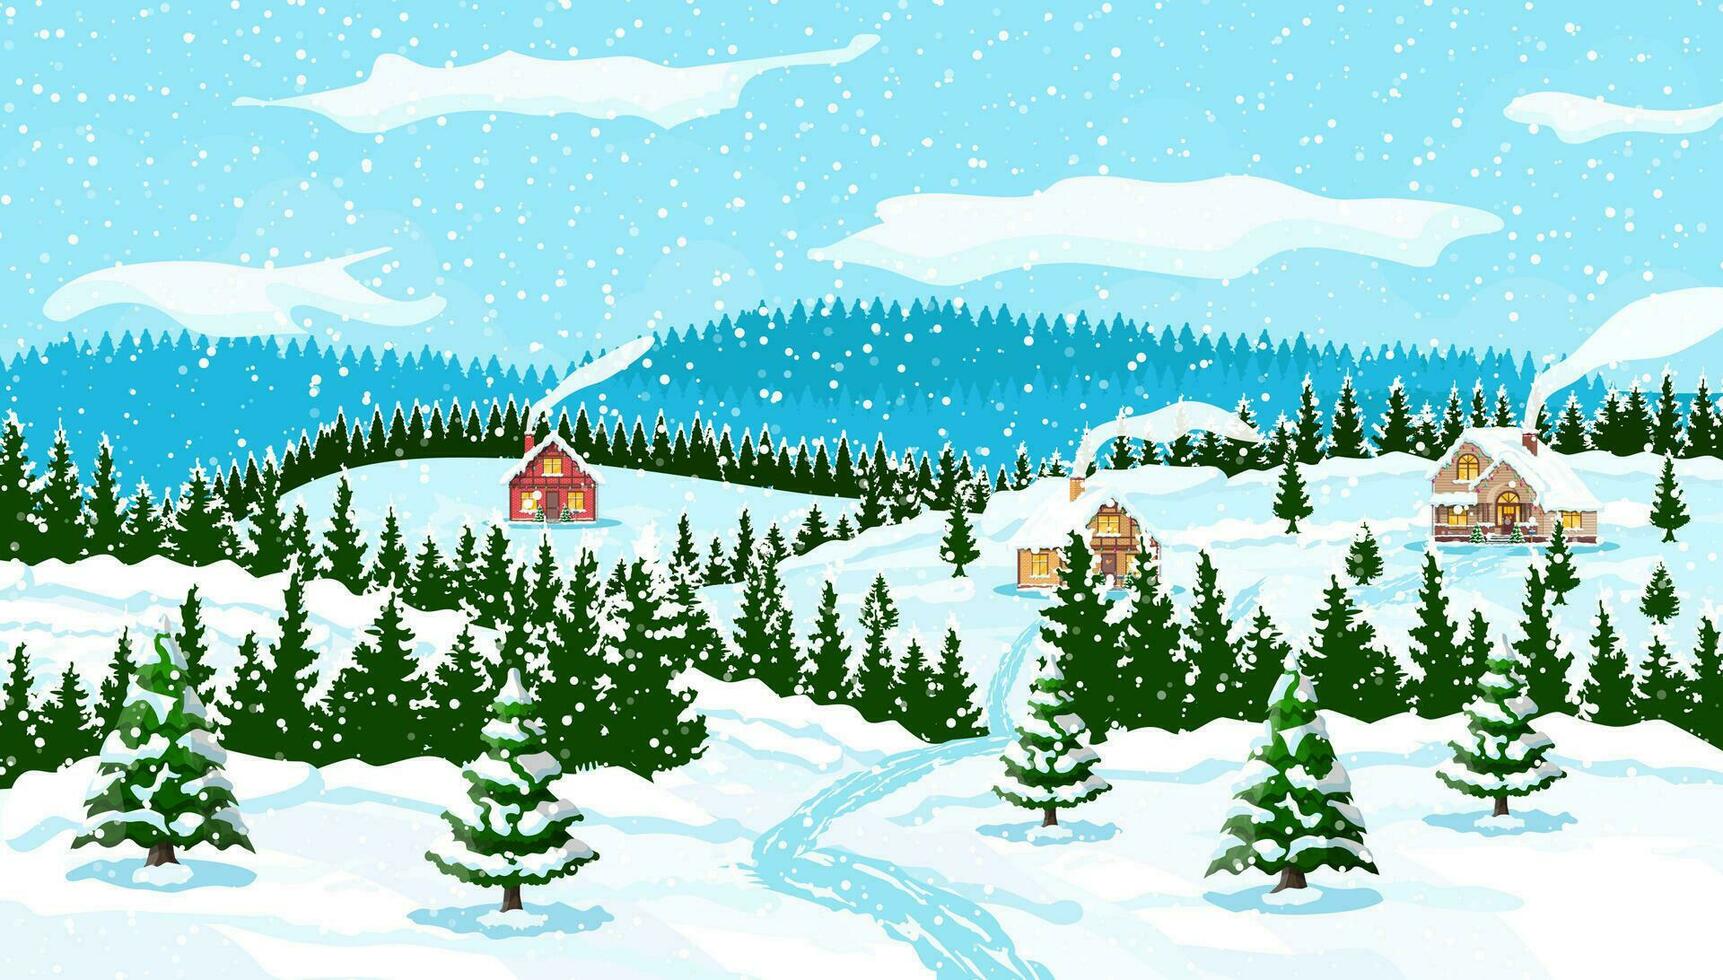 Winter christmas background. Pine tree wood and snow. Winter landscape with fir trees forest and village. Happy new year celebration. New year xmas holiday. Vector illustration flat style